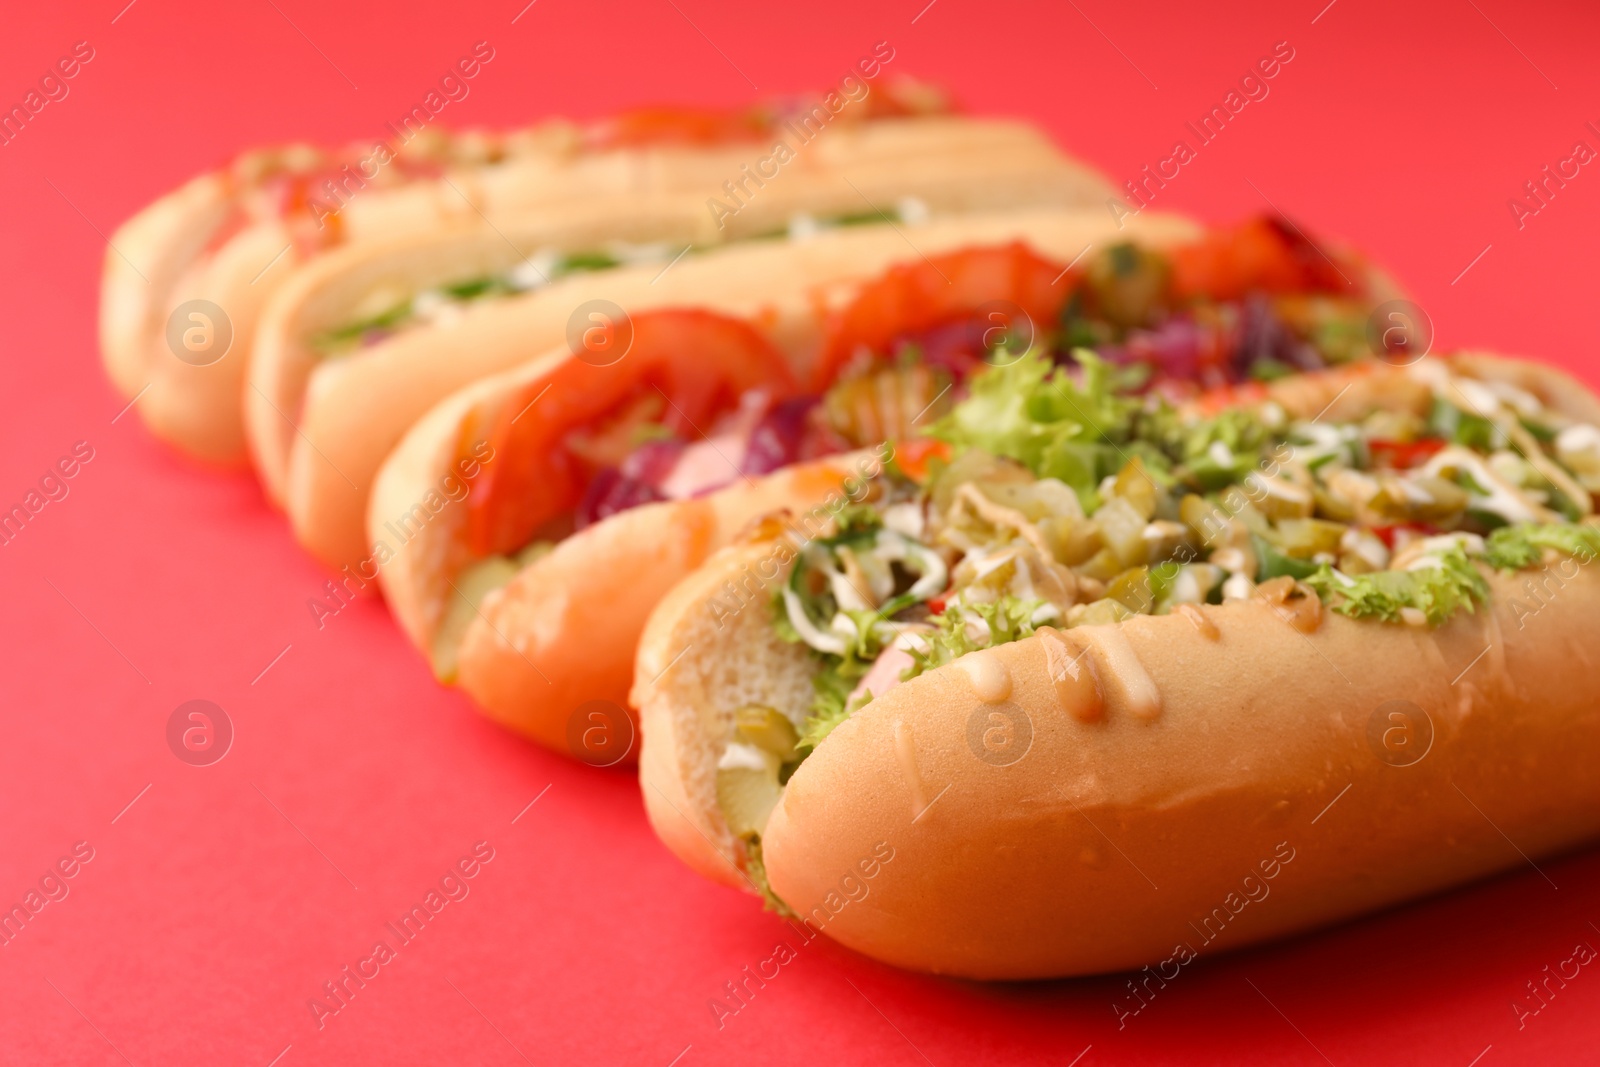 Photo of Delicious hot dogs with different toppings on red background, closeup